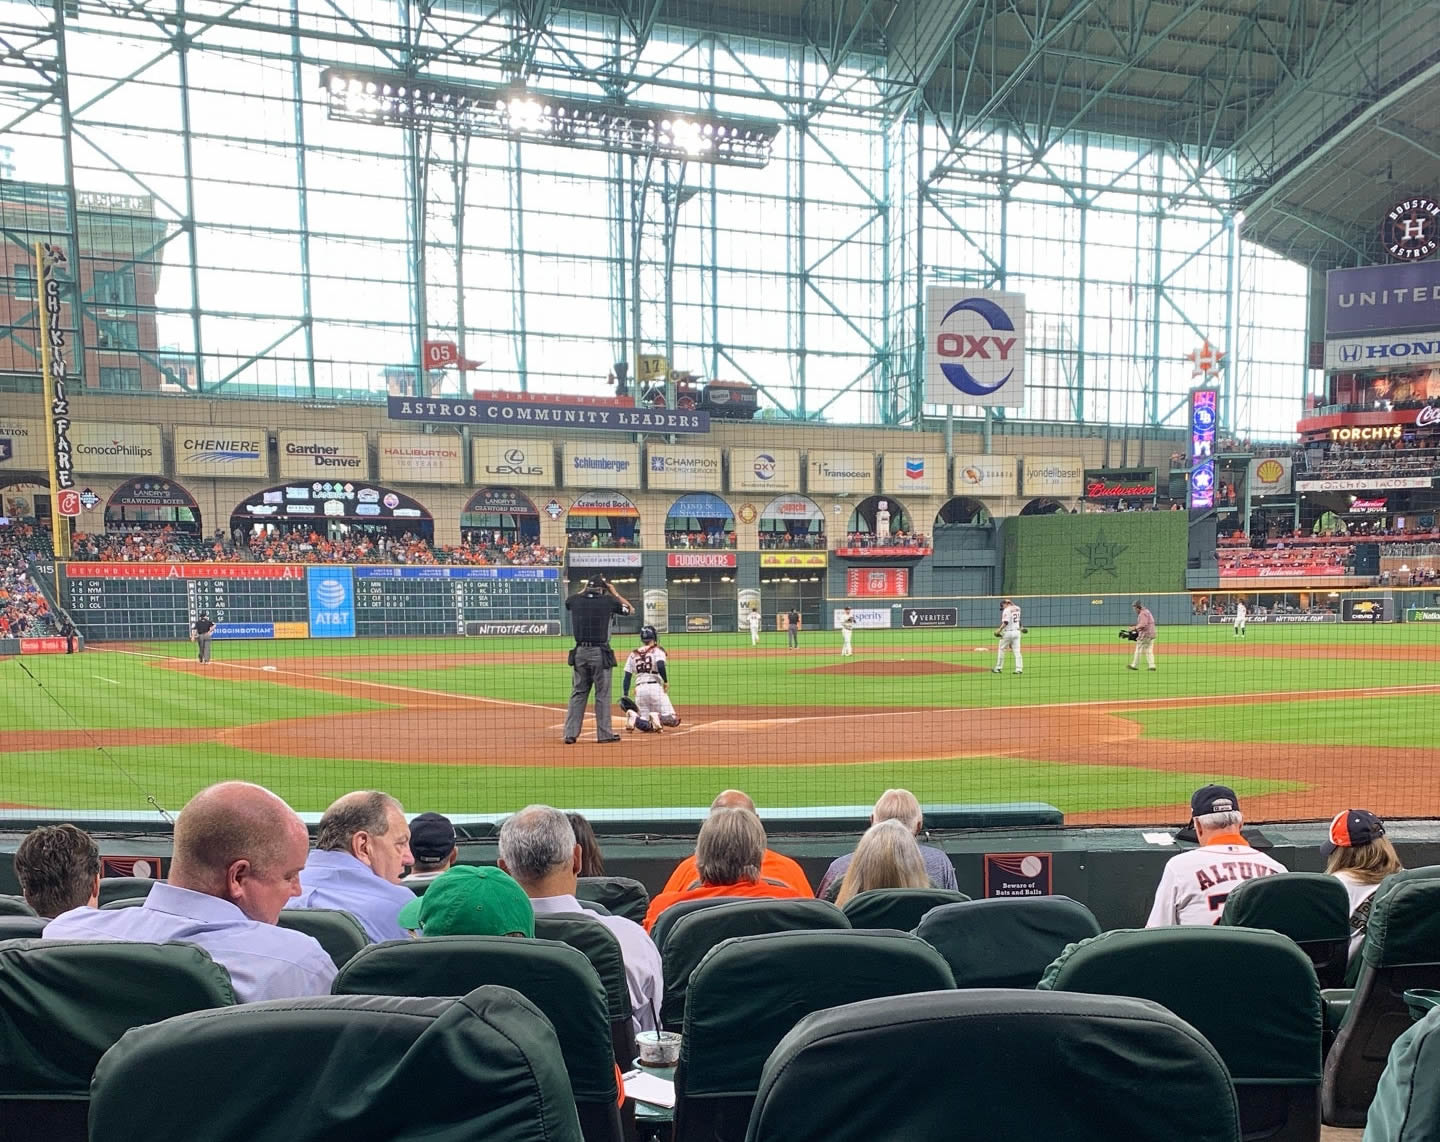 Minute Maid Park Seating Chart & Game Information